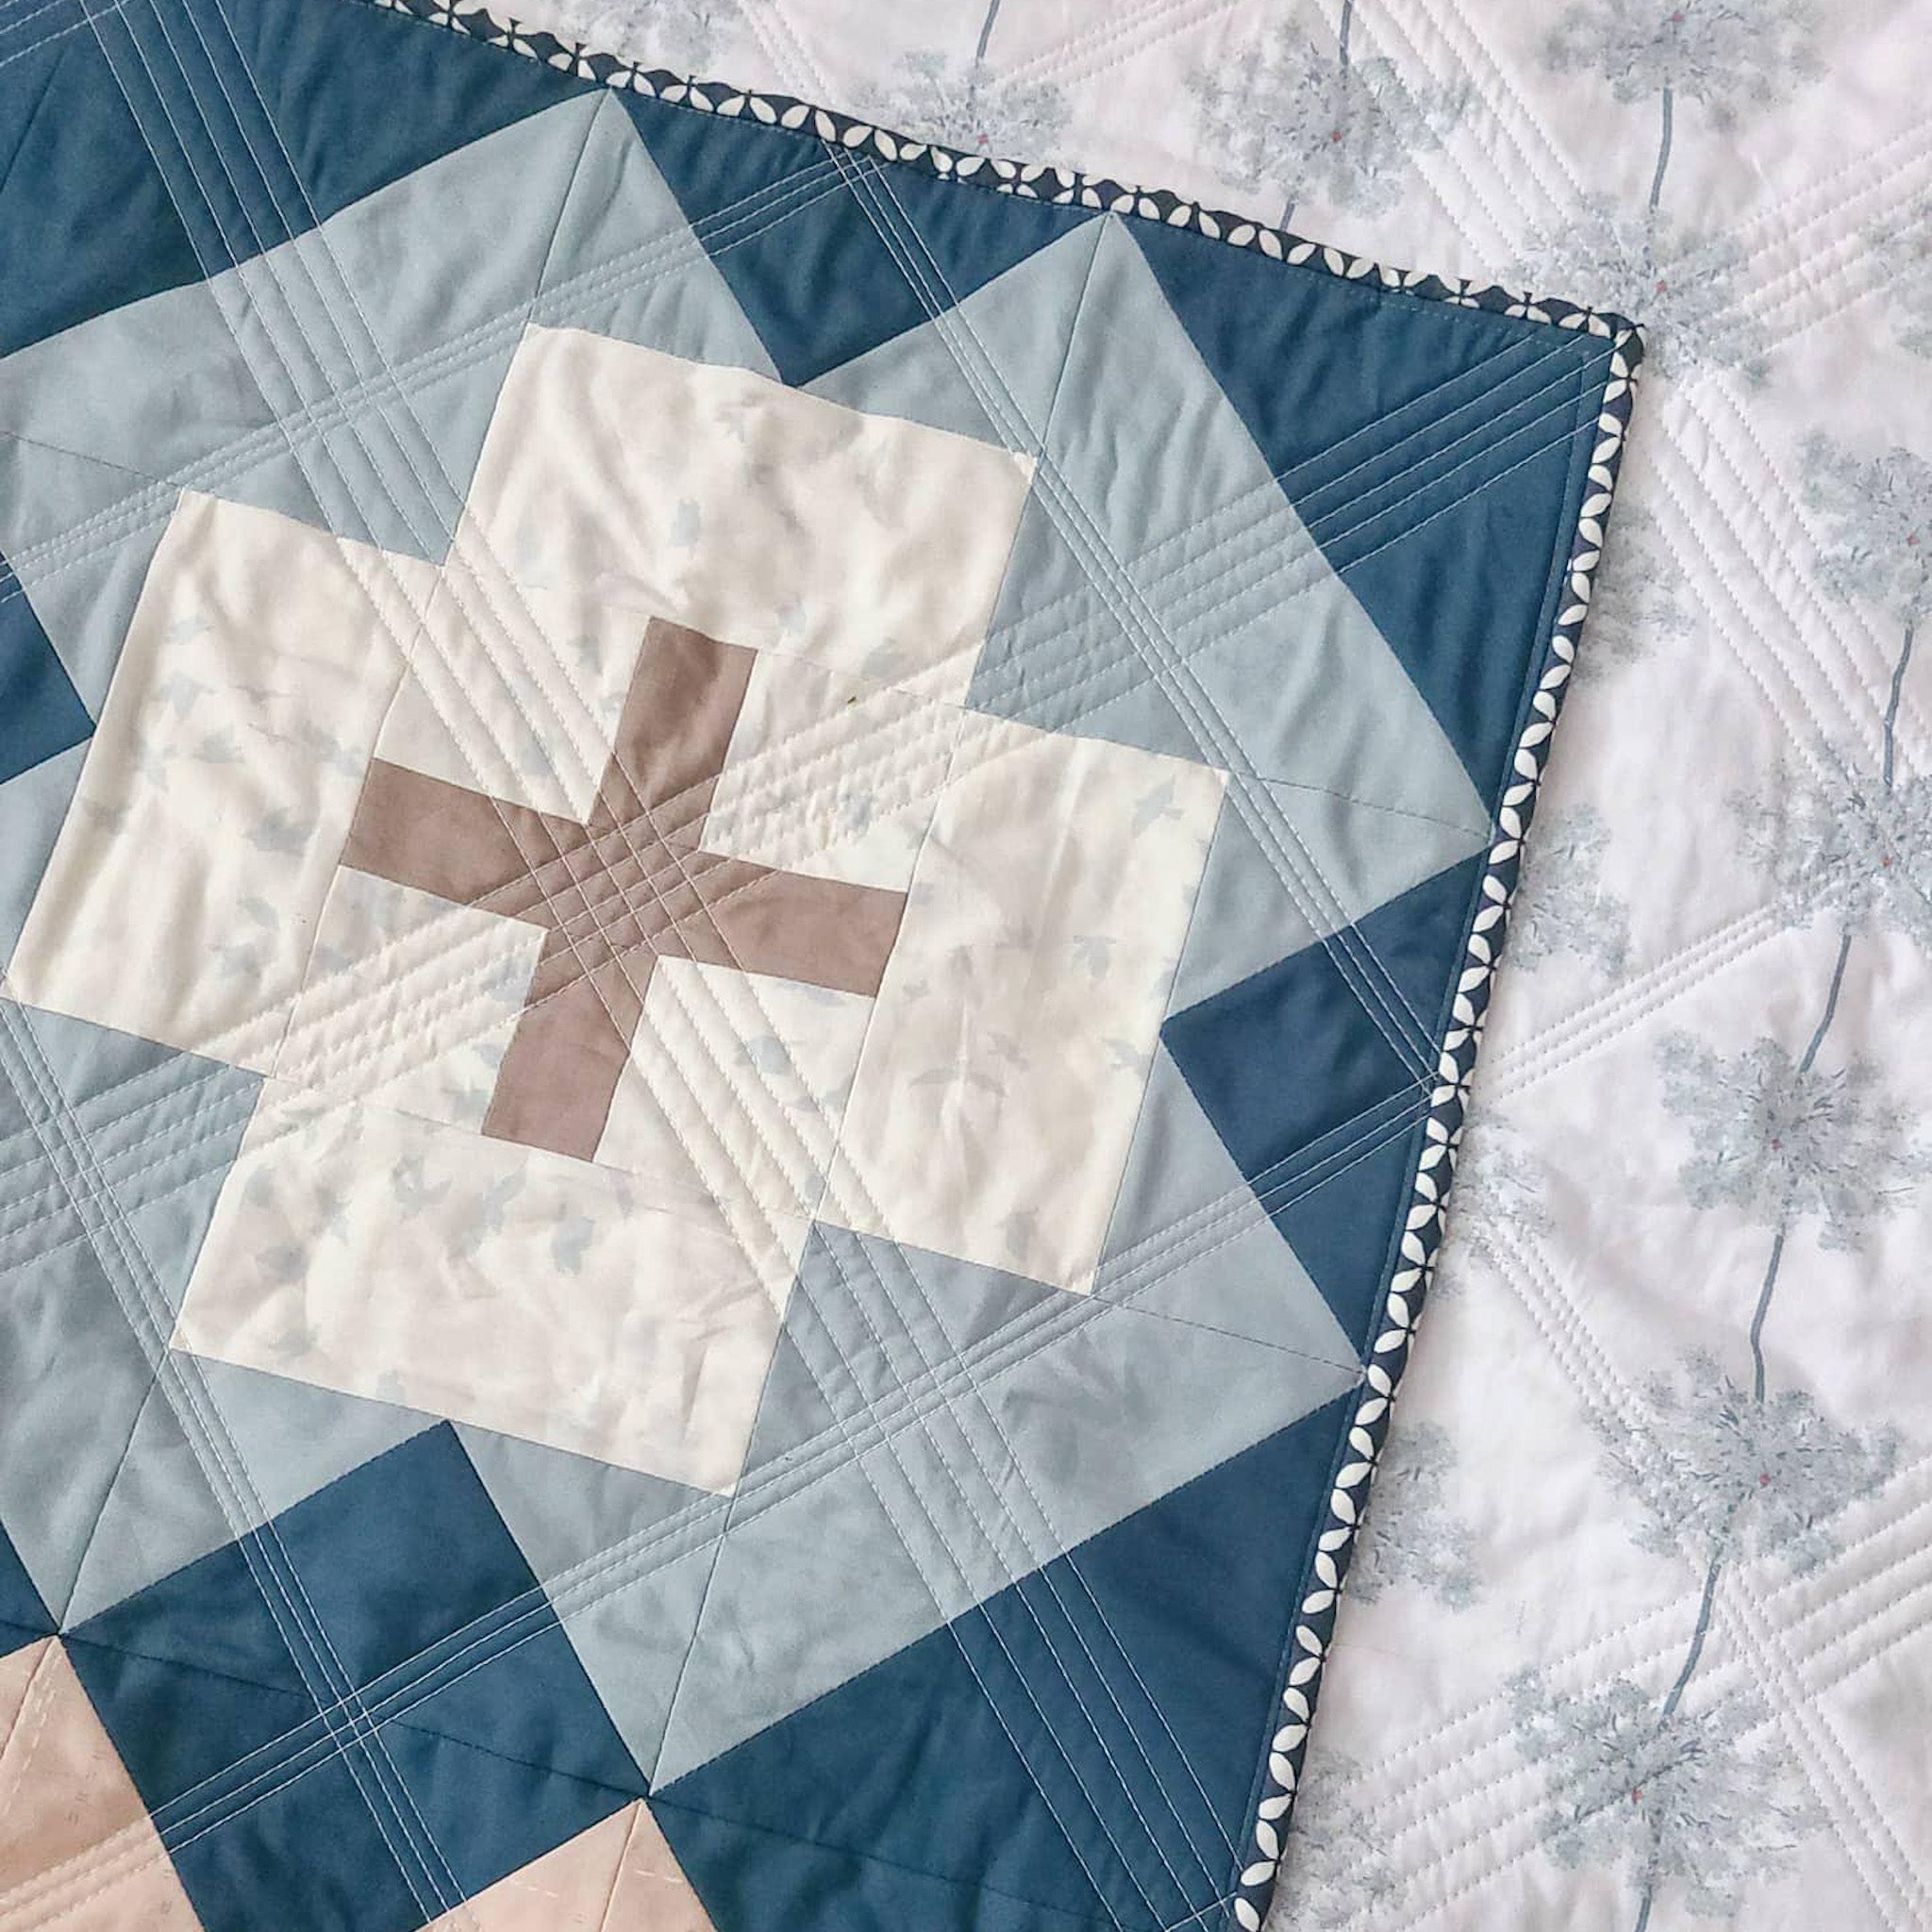 Nightingale - Pattern Tester Quilts, Quilt Kits & Inspiration